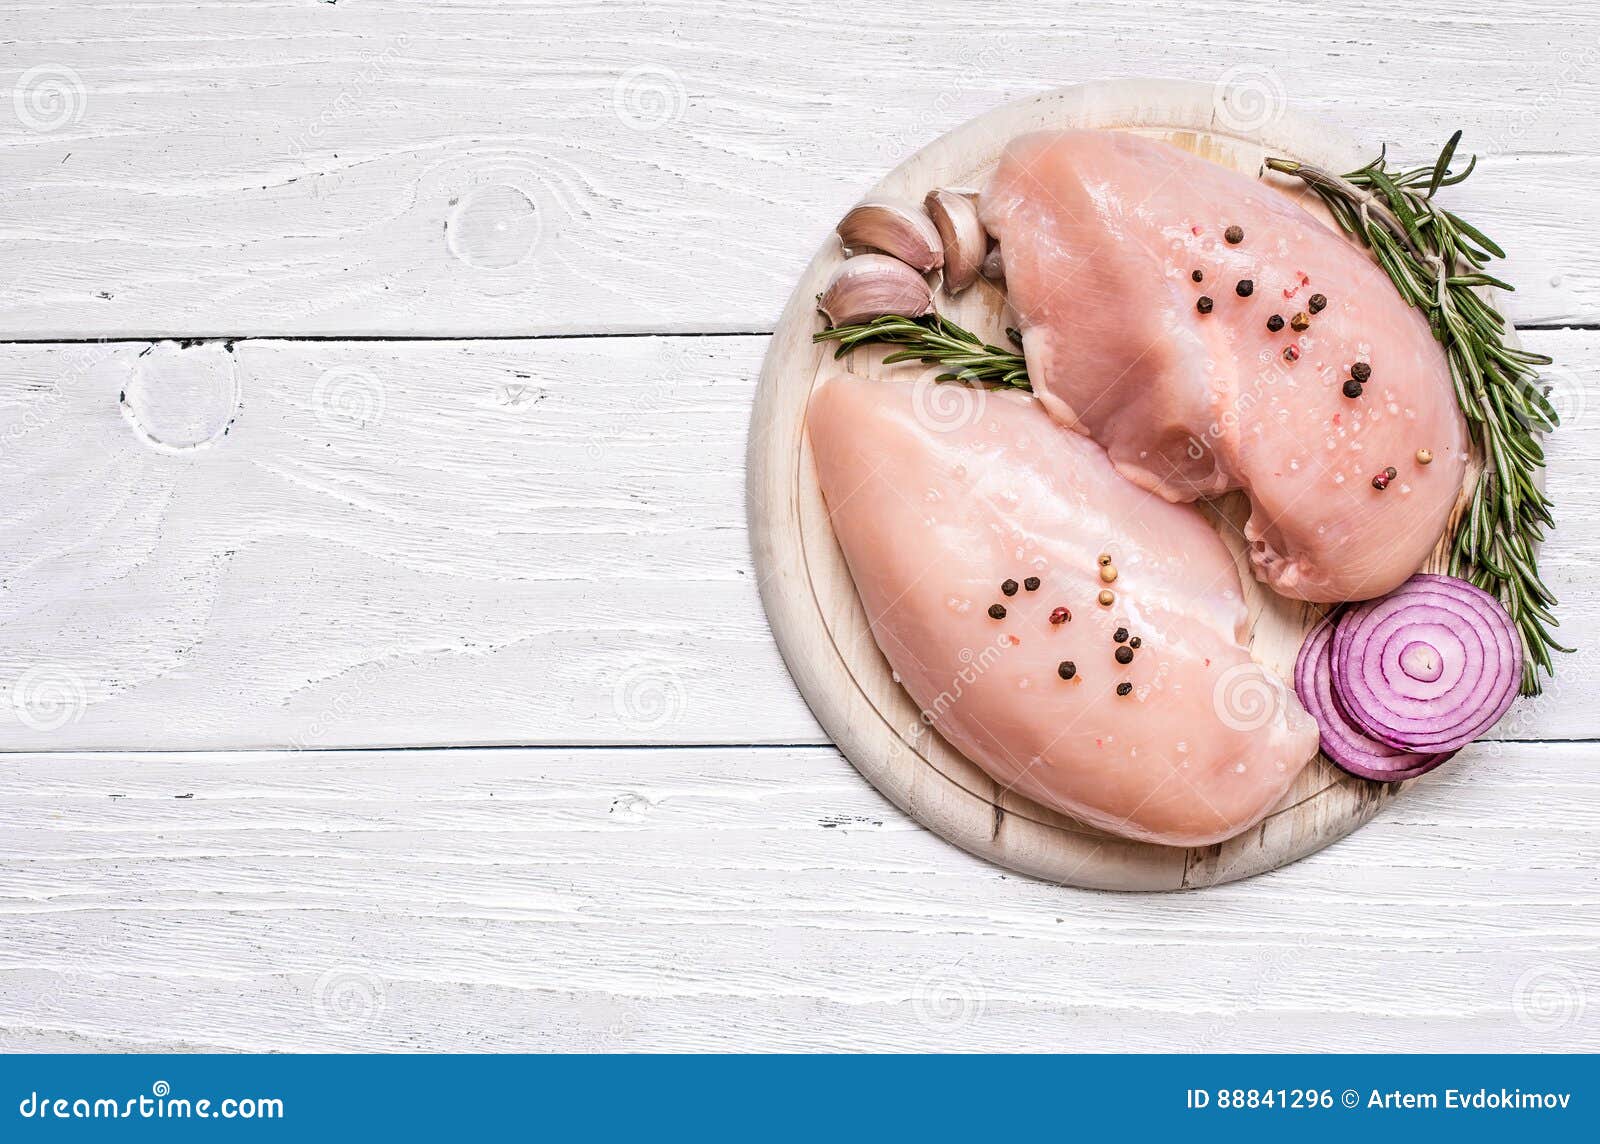 Raw Chicken Breast Fillets on Wooden Cutting Board Stock Photo - Image ...